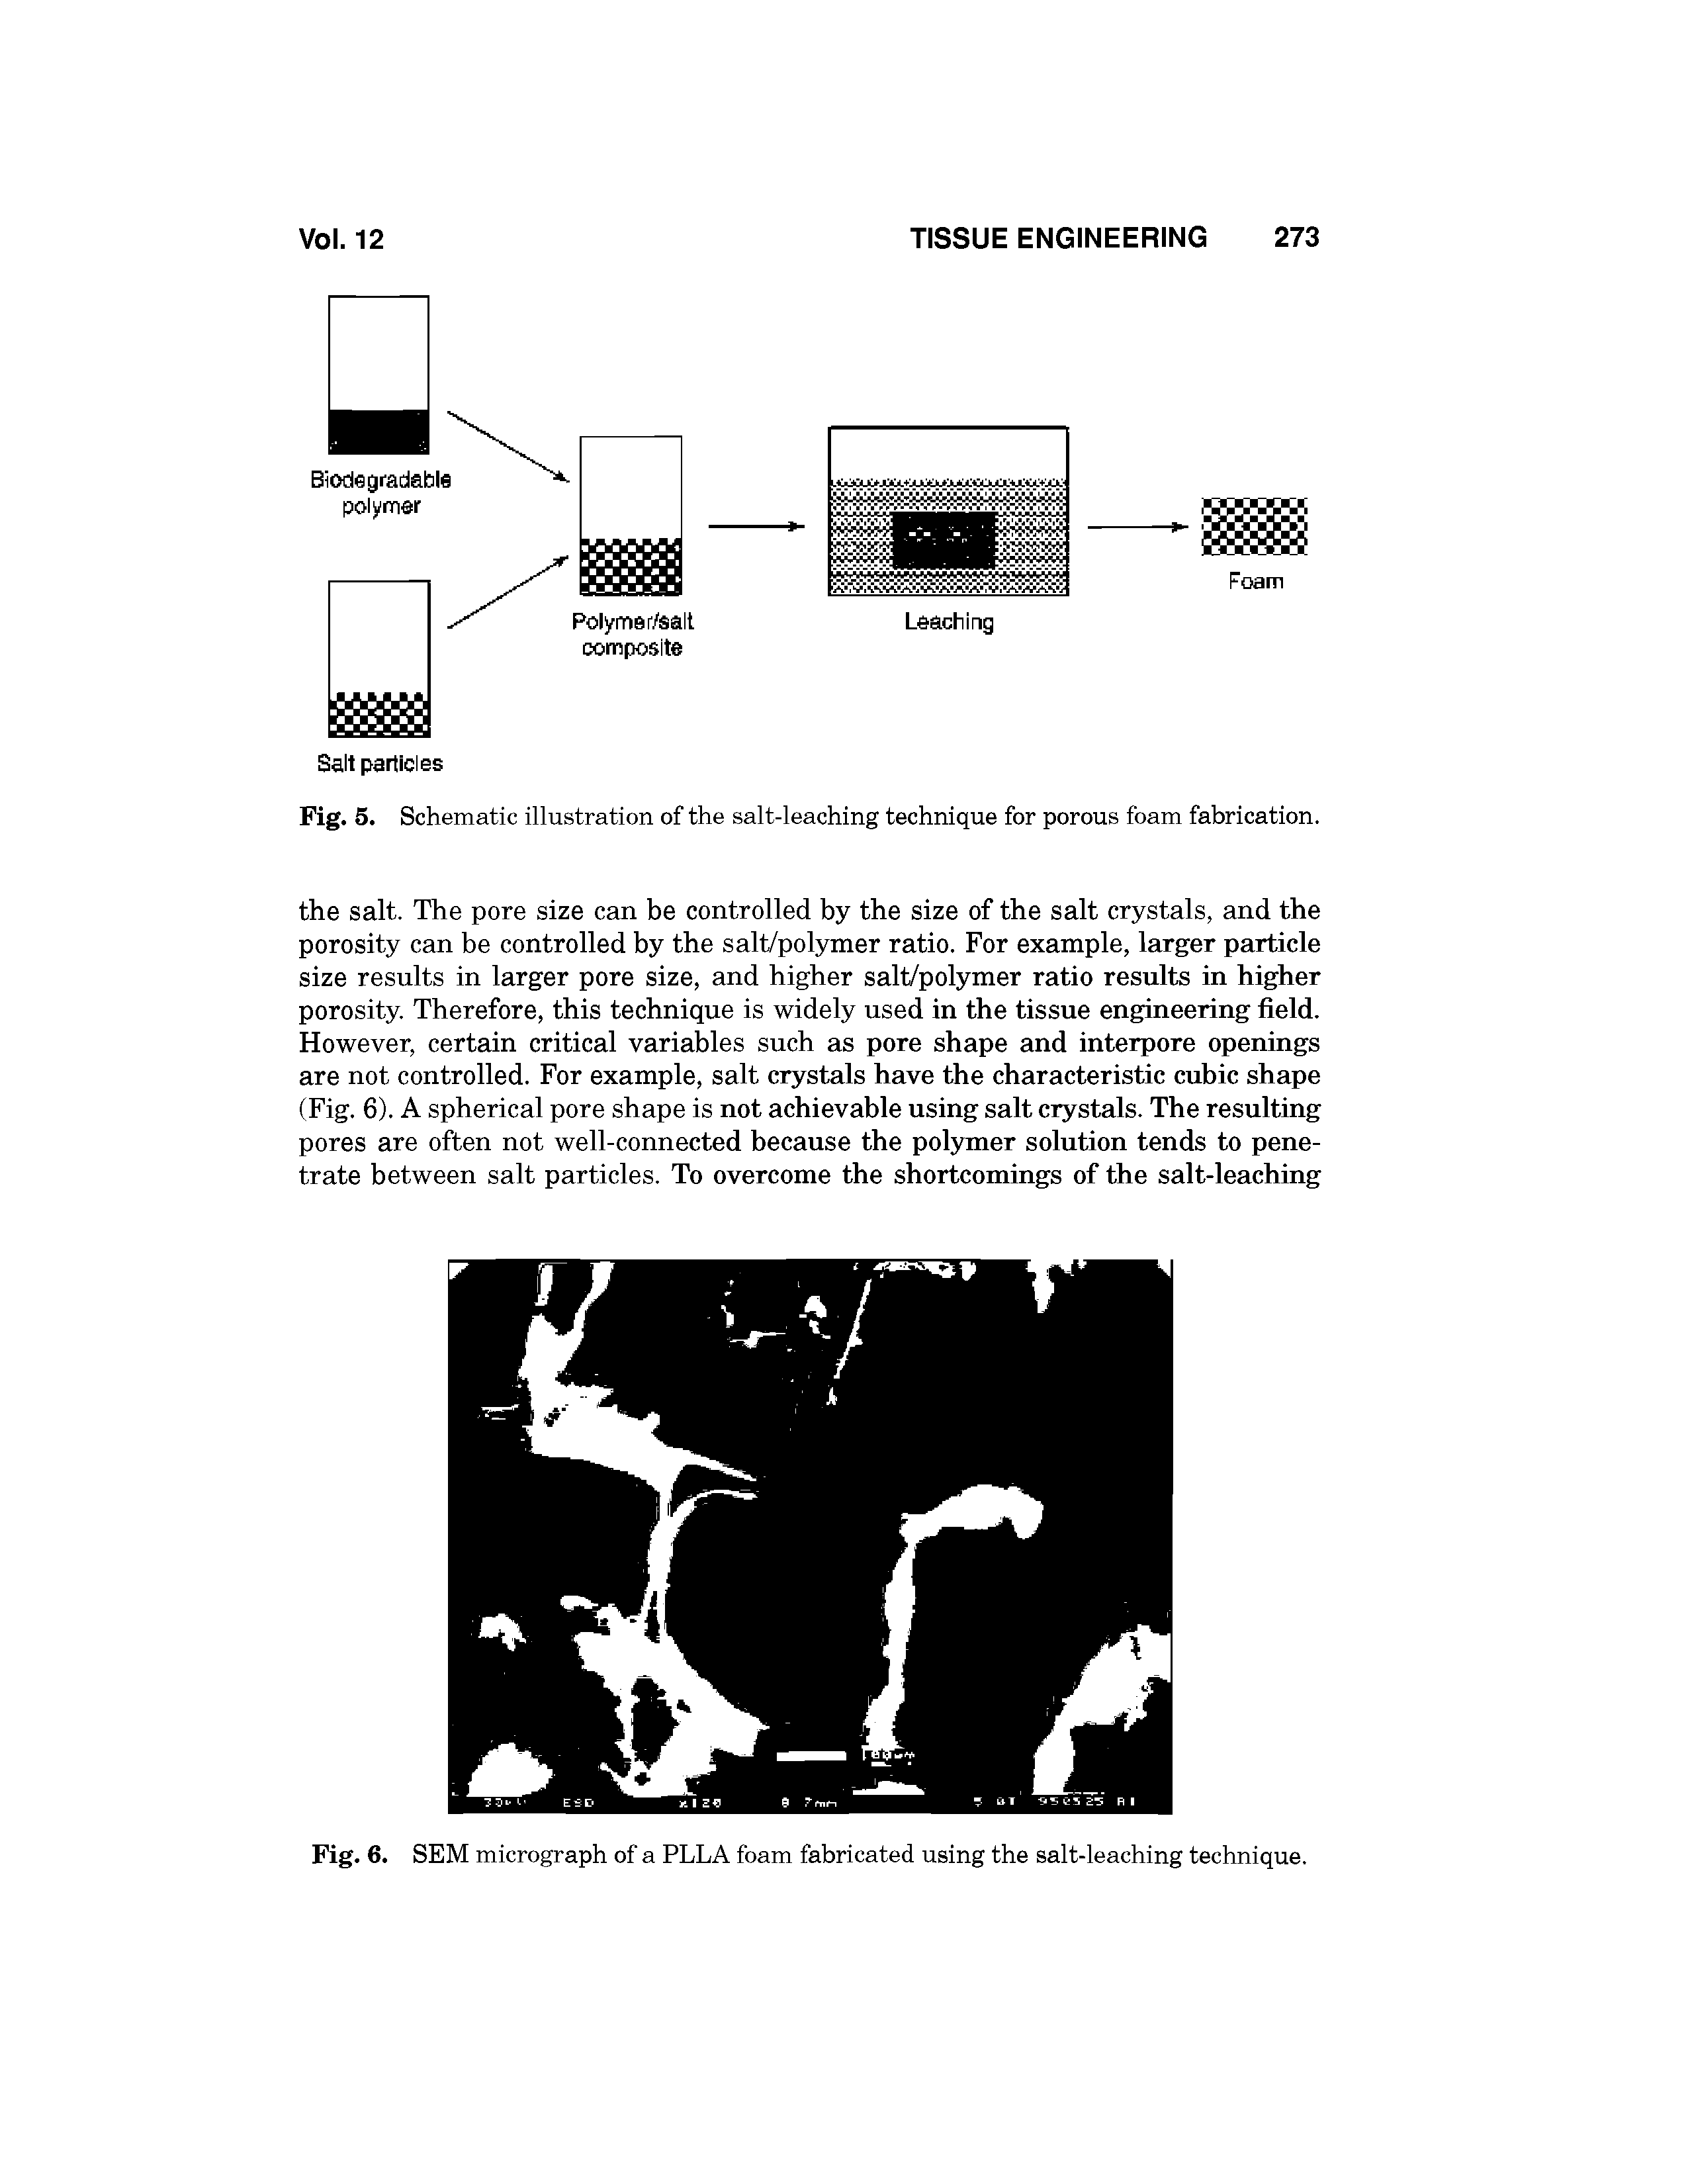 Fig. 5. Schematic illustration of the salt-leaching technique for porous foam fabrication.